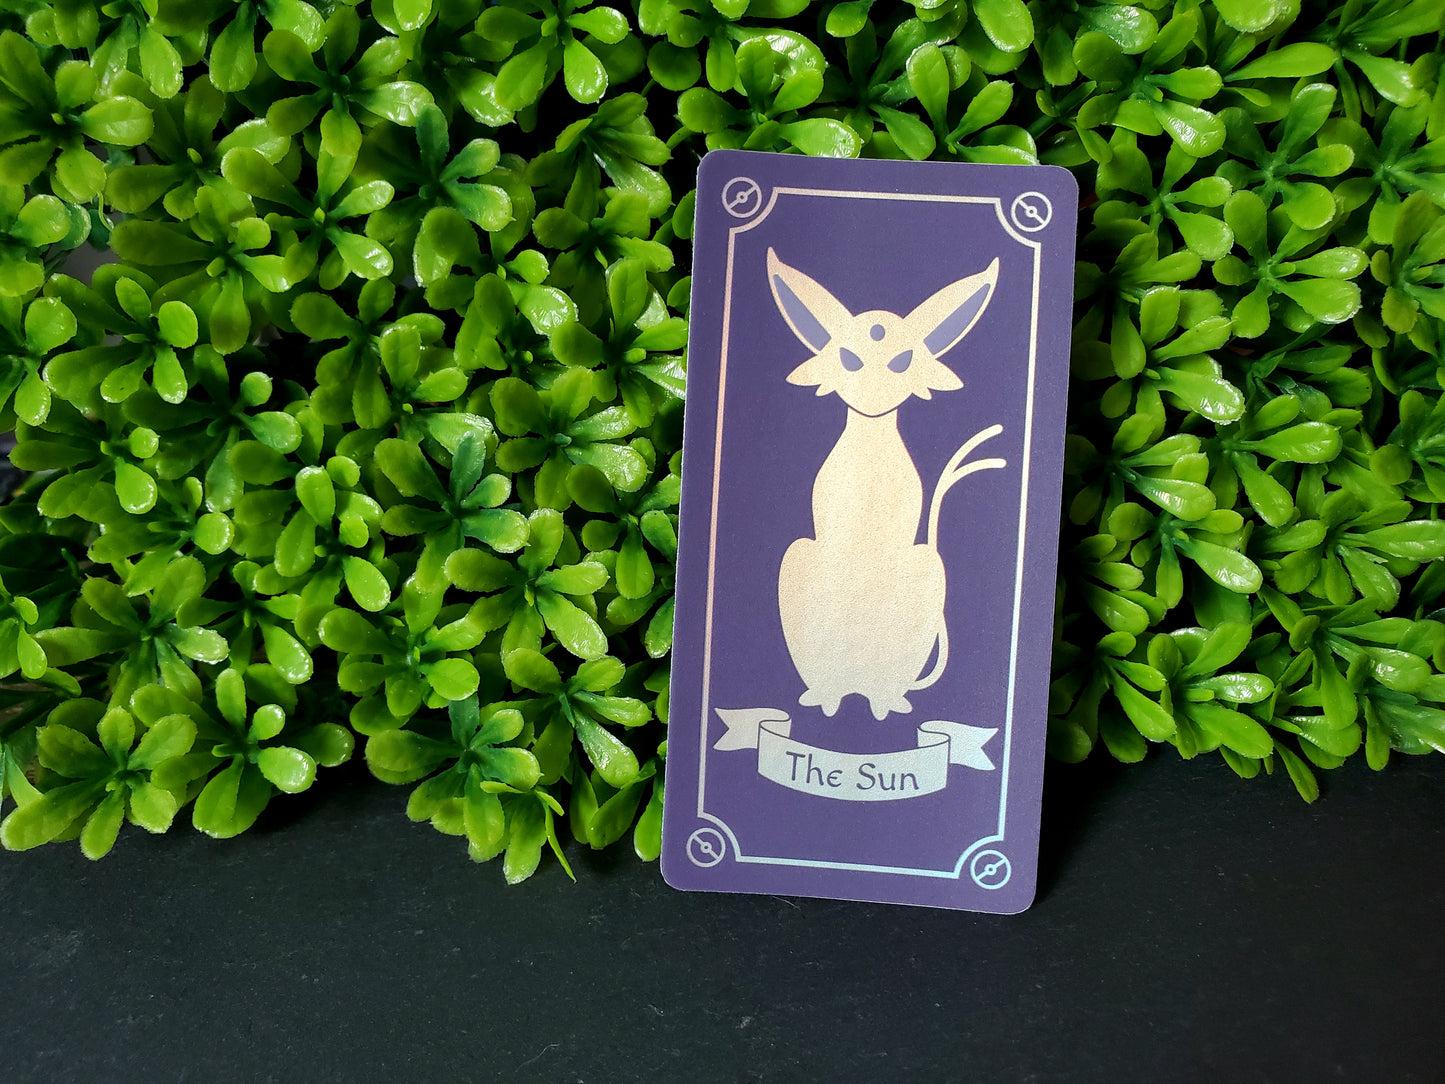 Espeon Tarot Card Inspired Sticker - The Sun - Purple sticker with holographic vaporwave shimmer